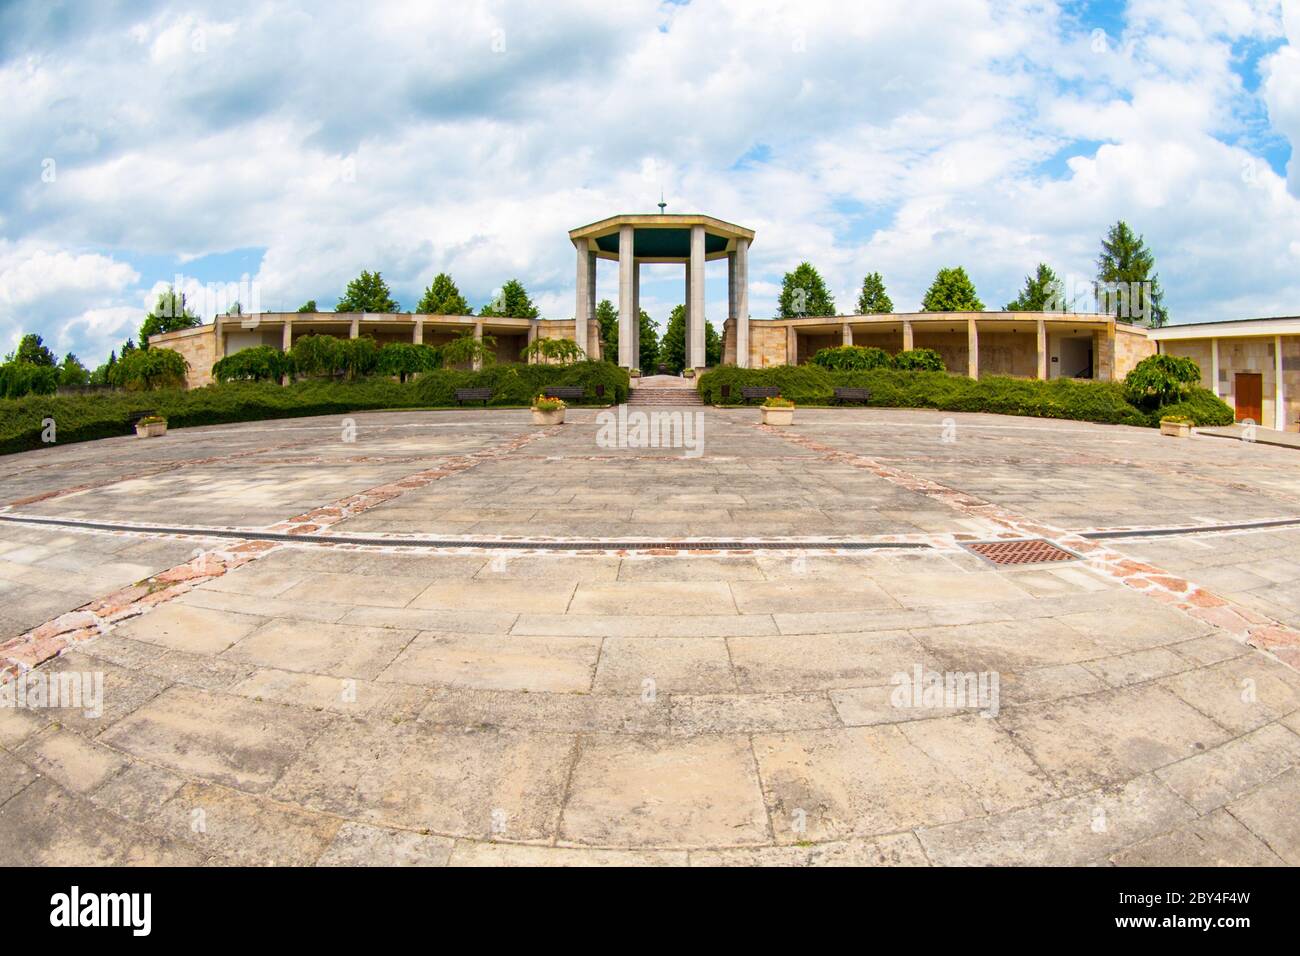 World War Memorial in a place of former village Lidice completely destroyed by German forces in reprisal for the assassination of Reich Protector Reinhard Heydrich Stock Photo